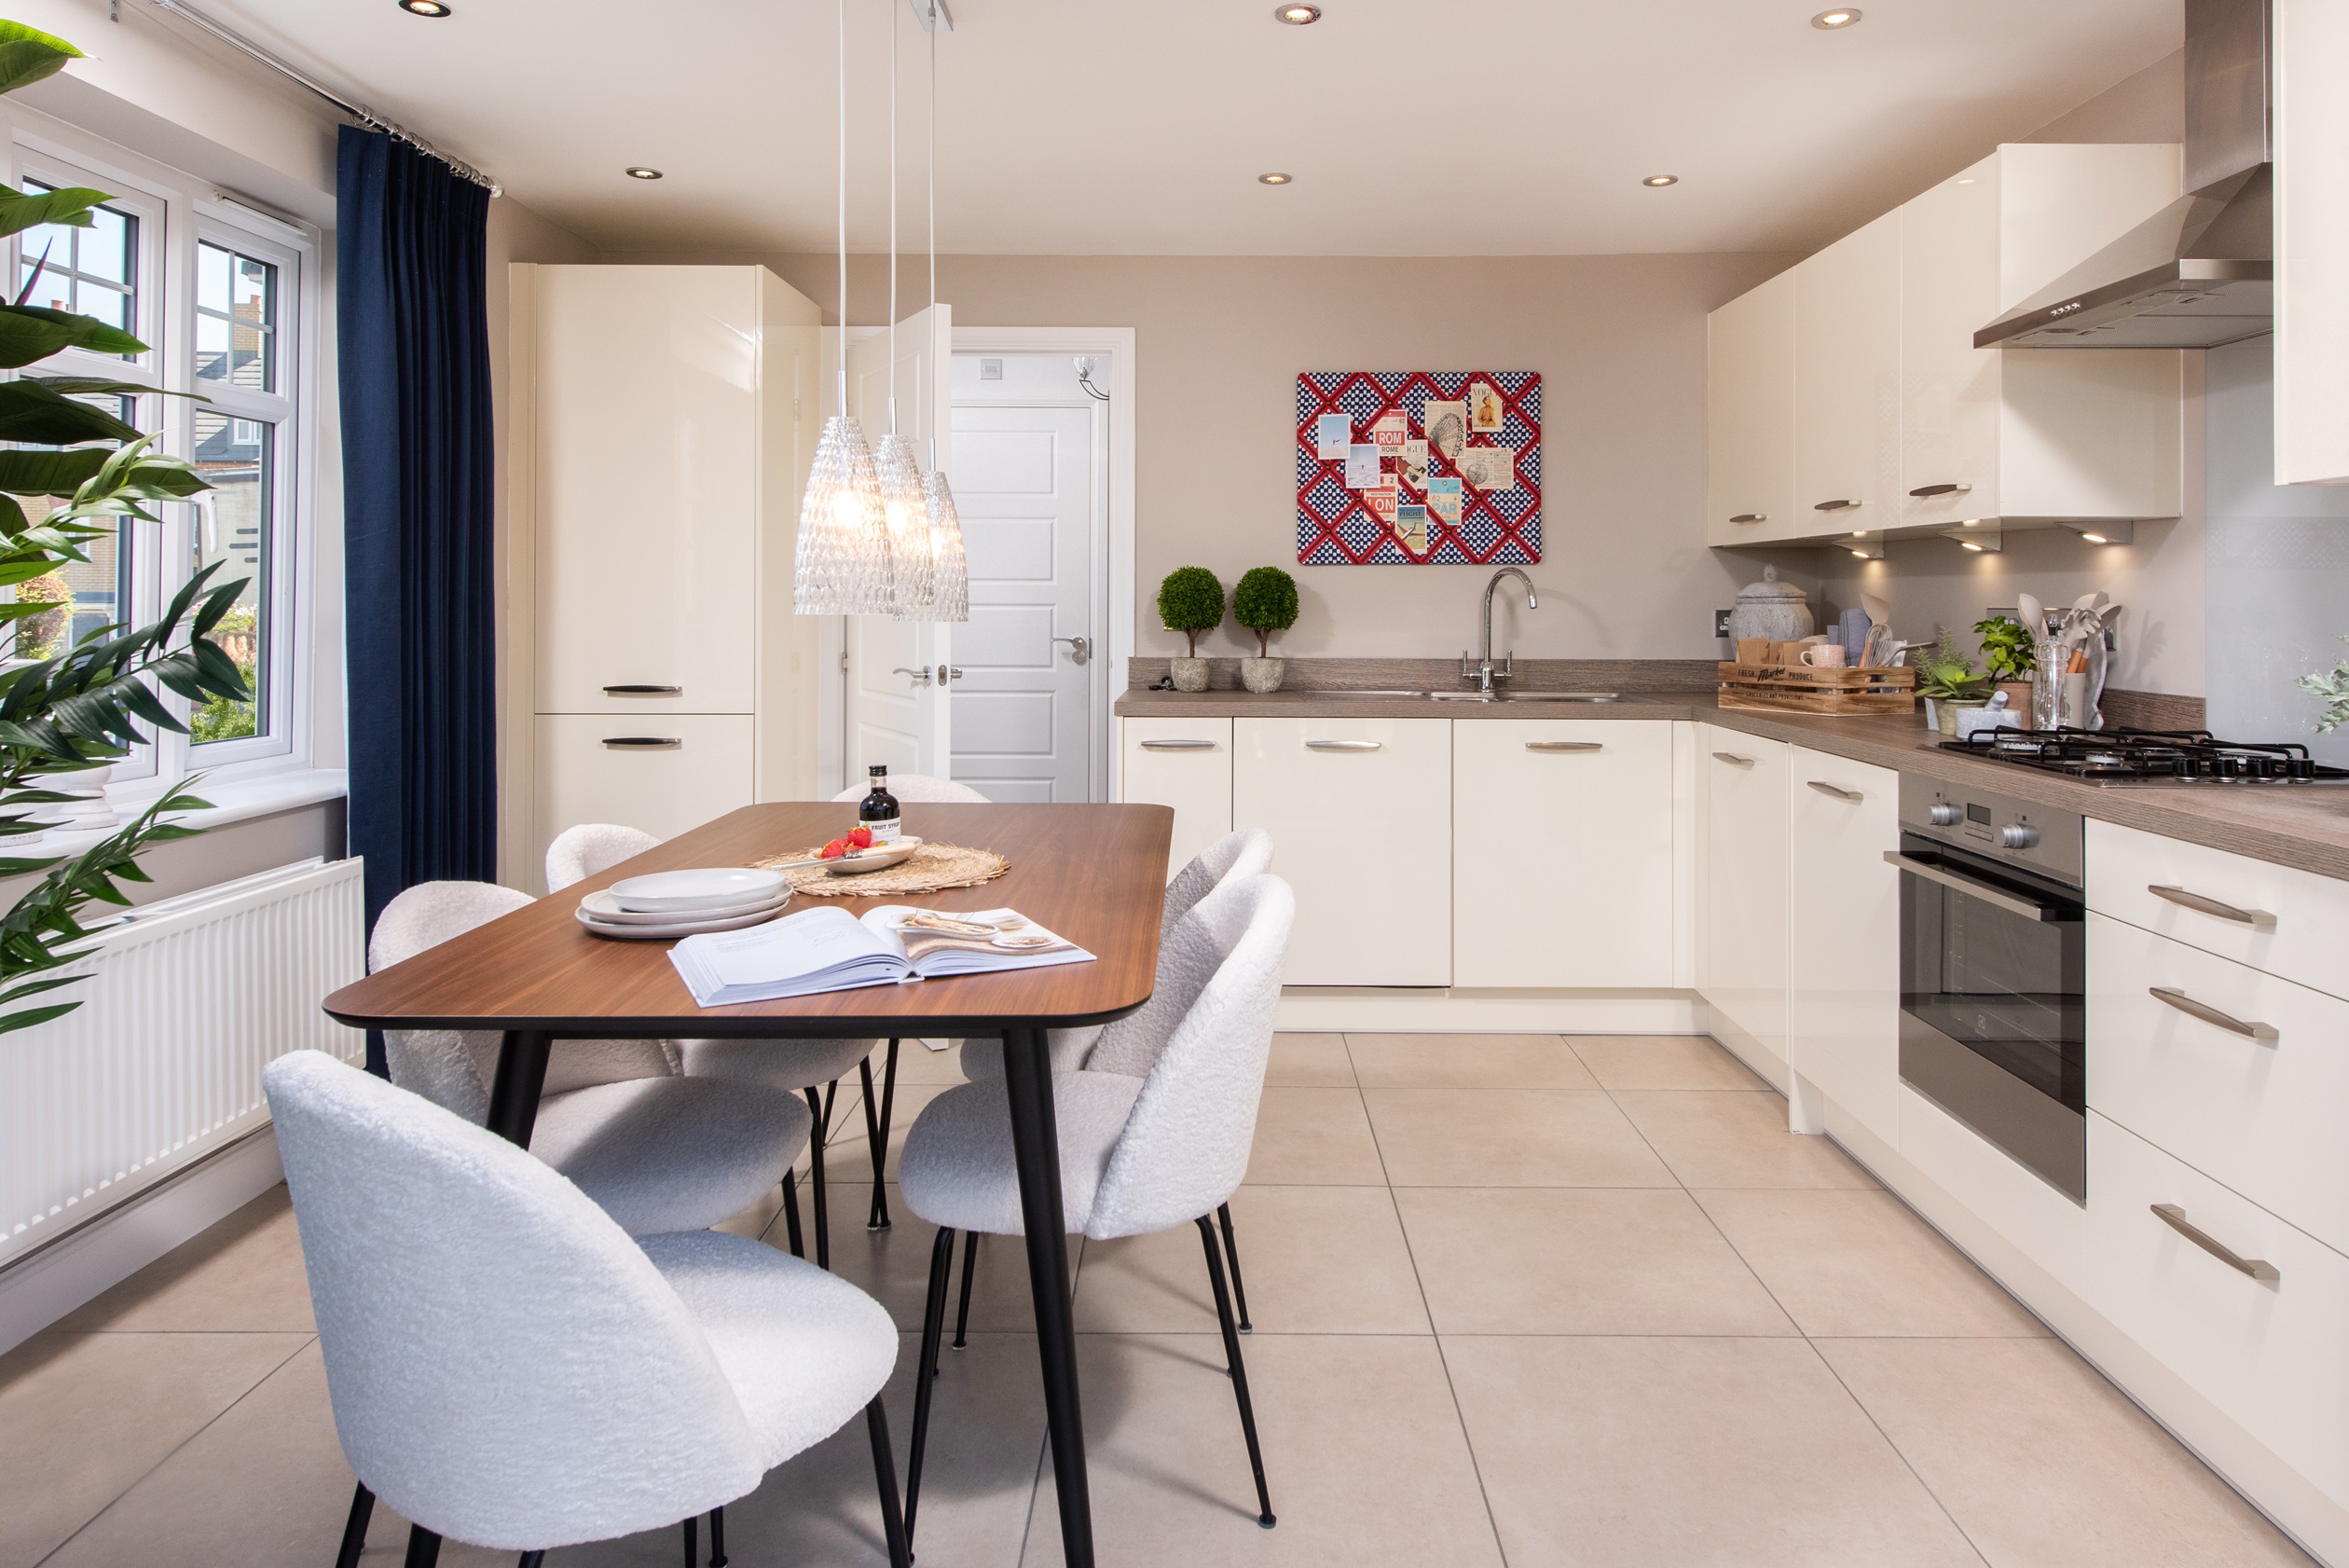 Property 3 of 8. Brentford Show Home Kitchen 2